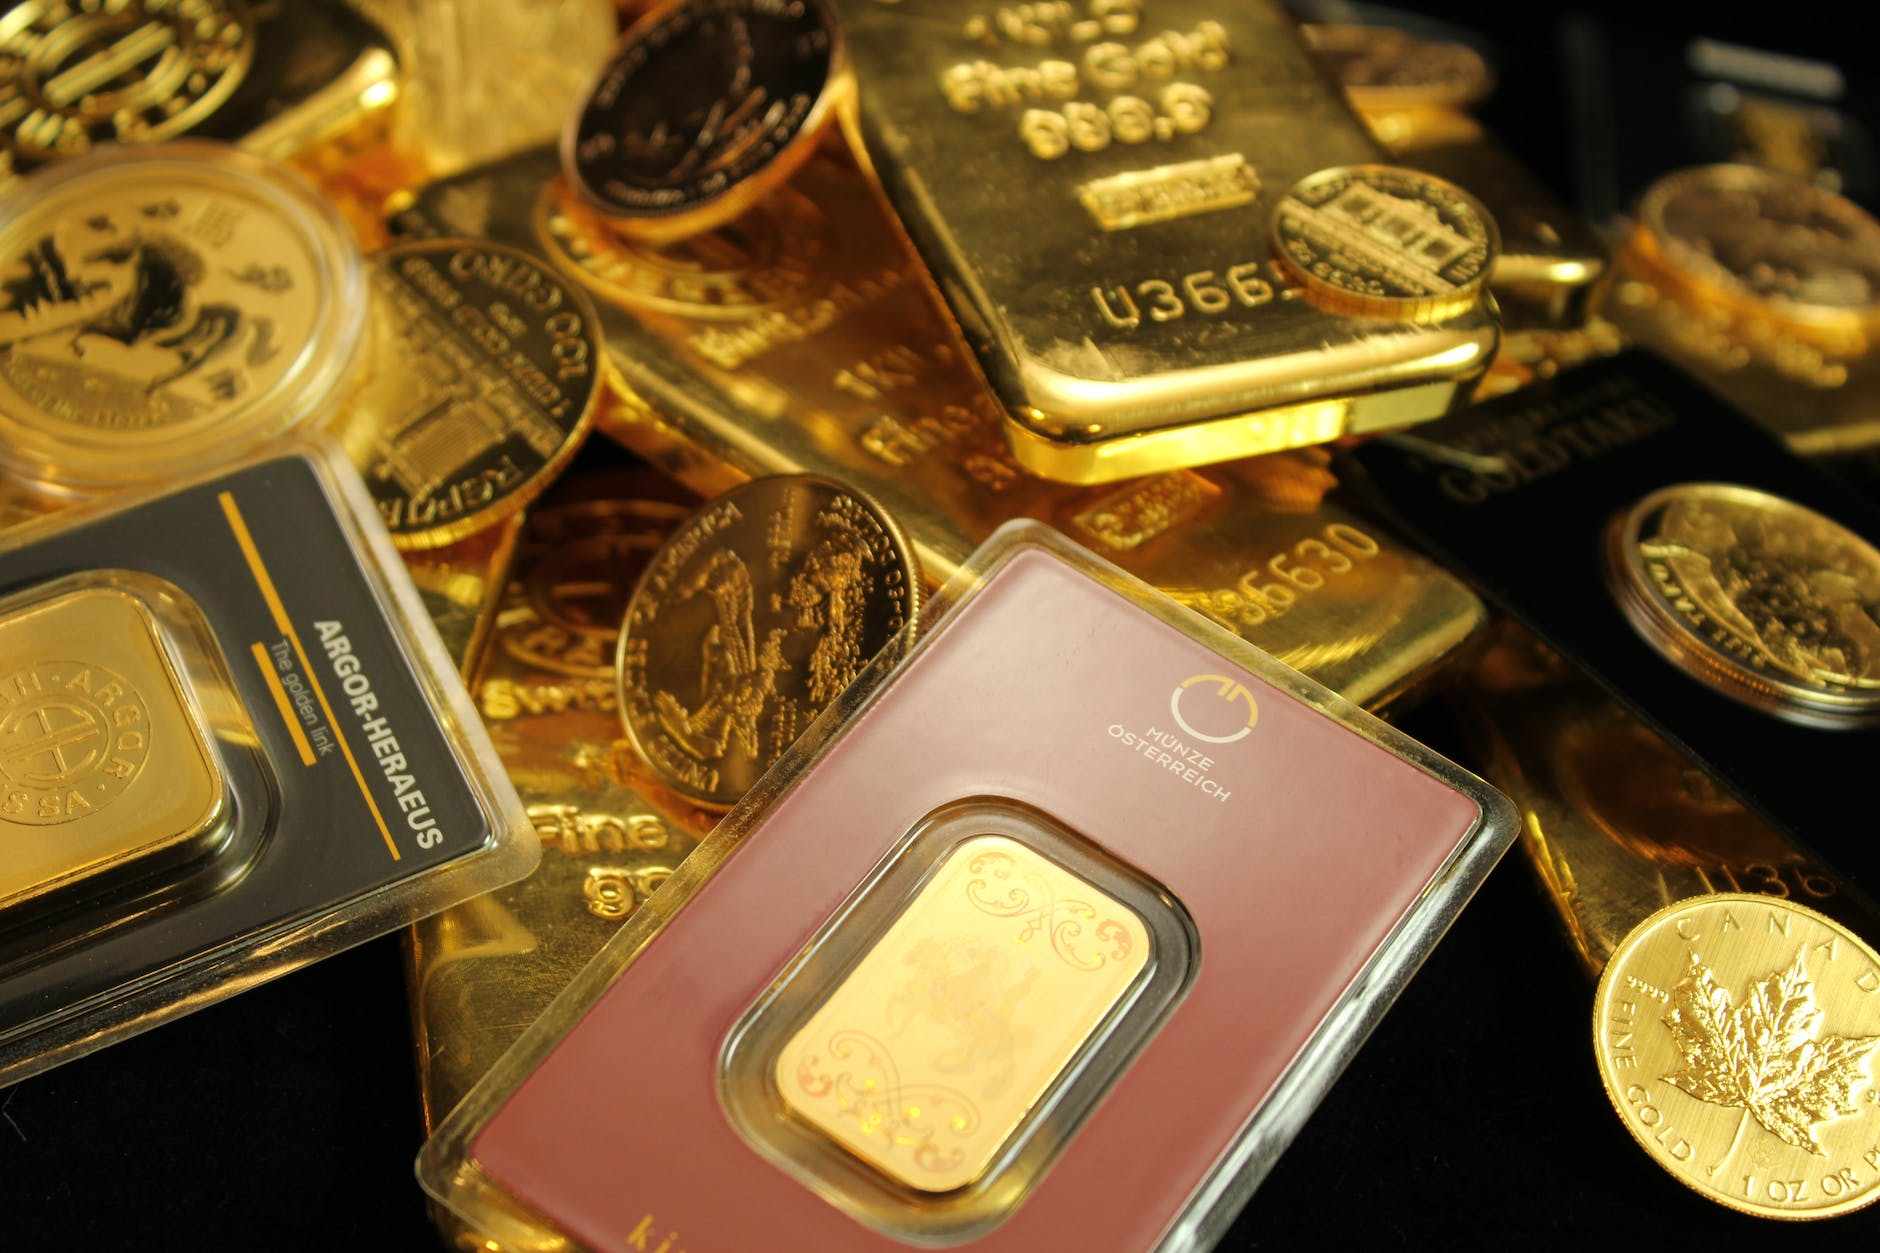 expats,gold,bought,purchases,bullion